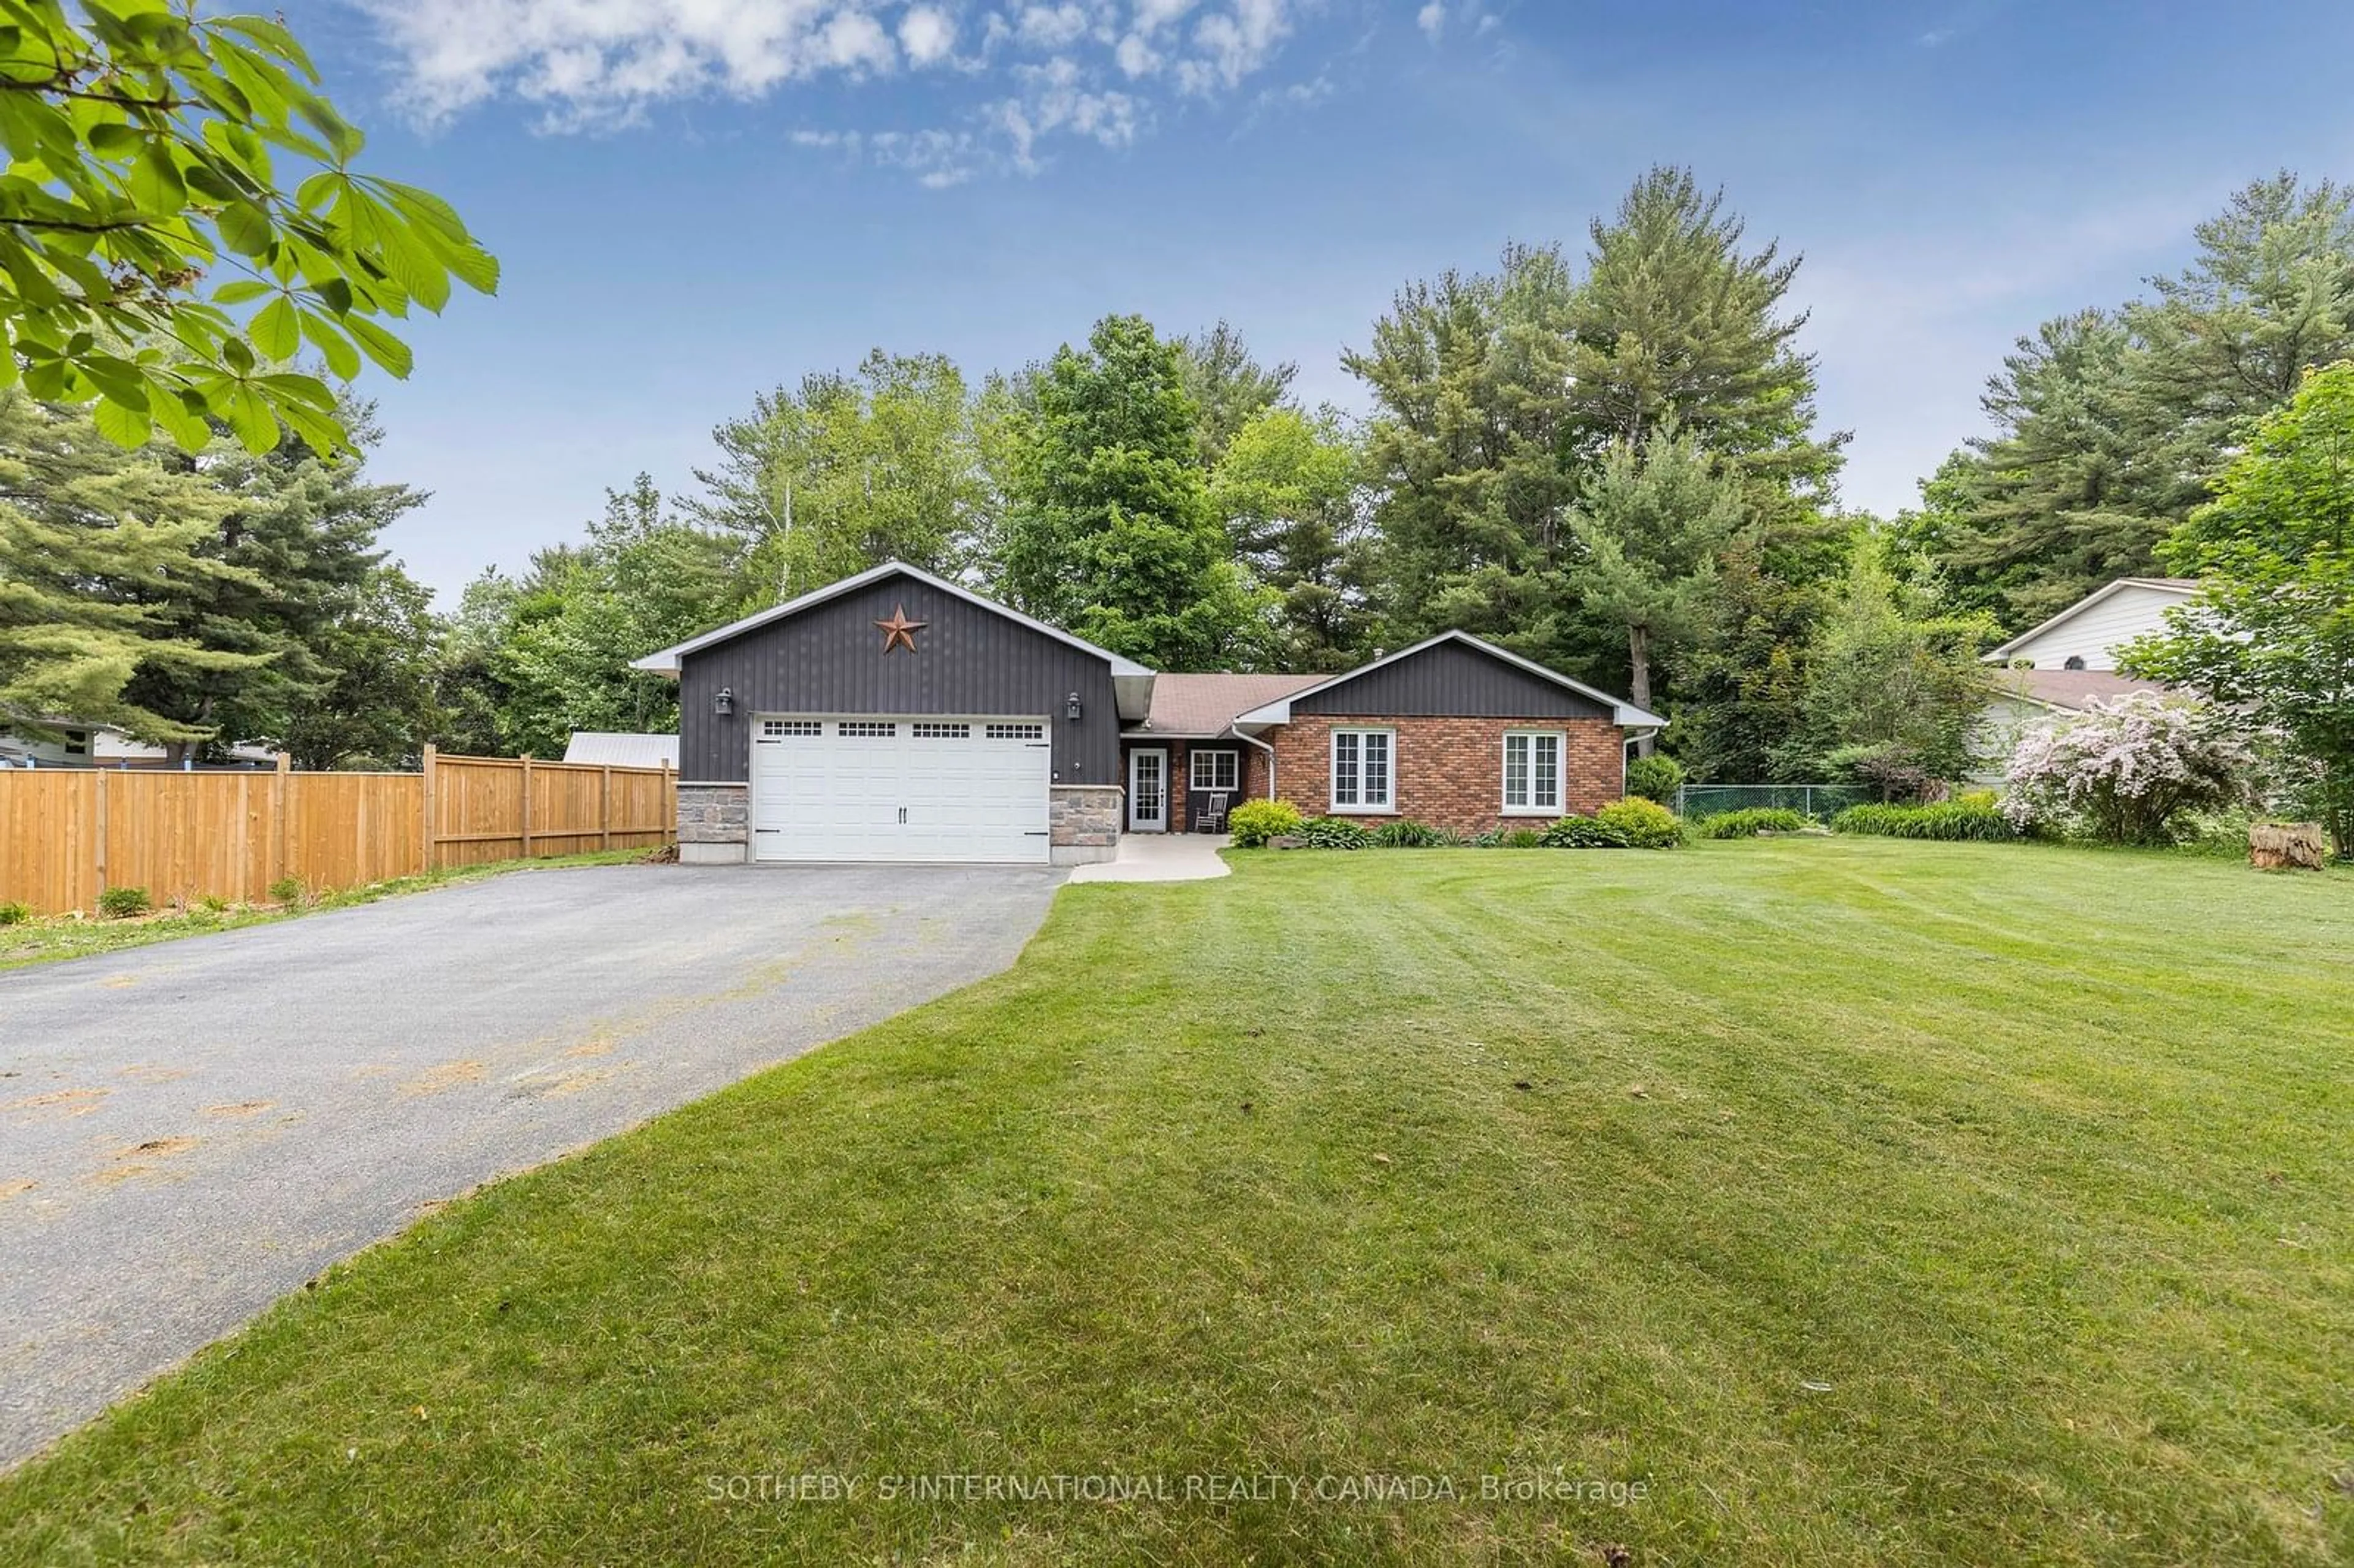 Frontside or backside of a home for 21 Luella Blvd, Springwater Ontario L9X 0X1